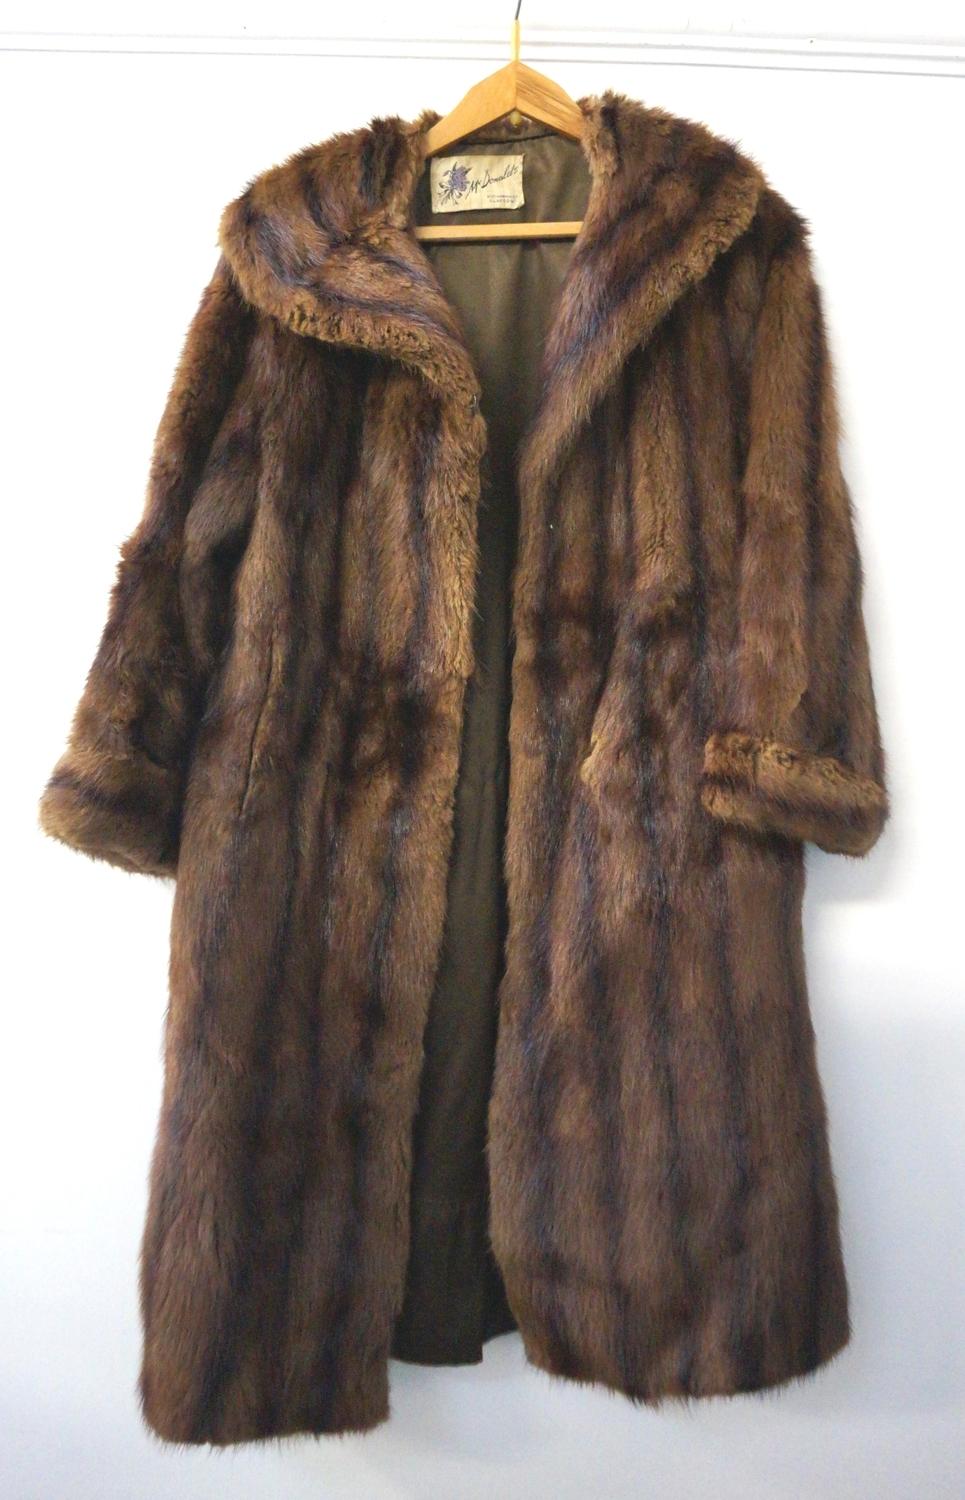 LADYS MUSQUASH COAT with a shawl collar, inside pocket and two outer pockets, bearing a trade